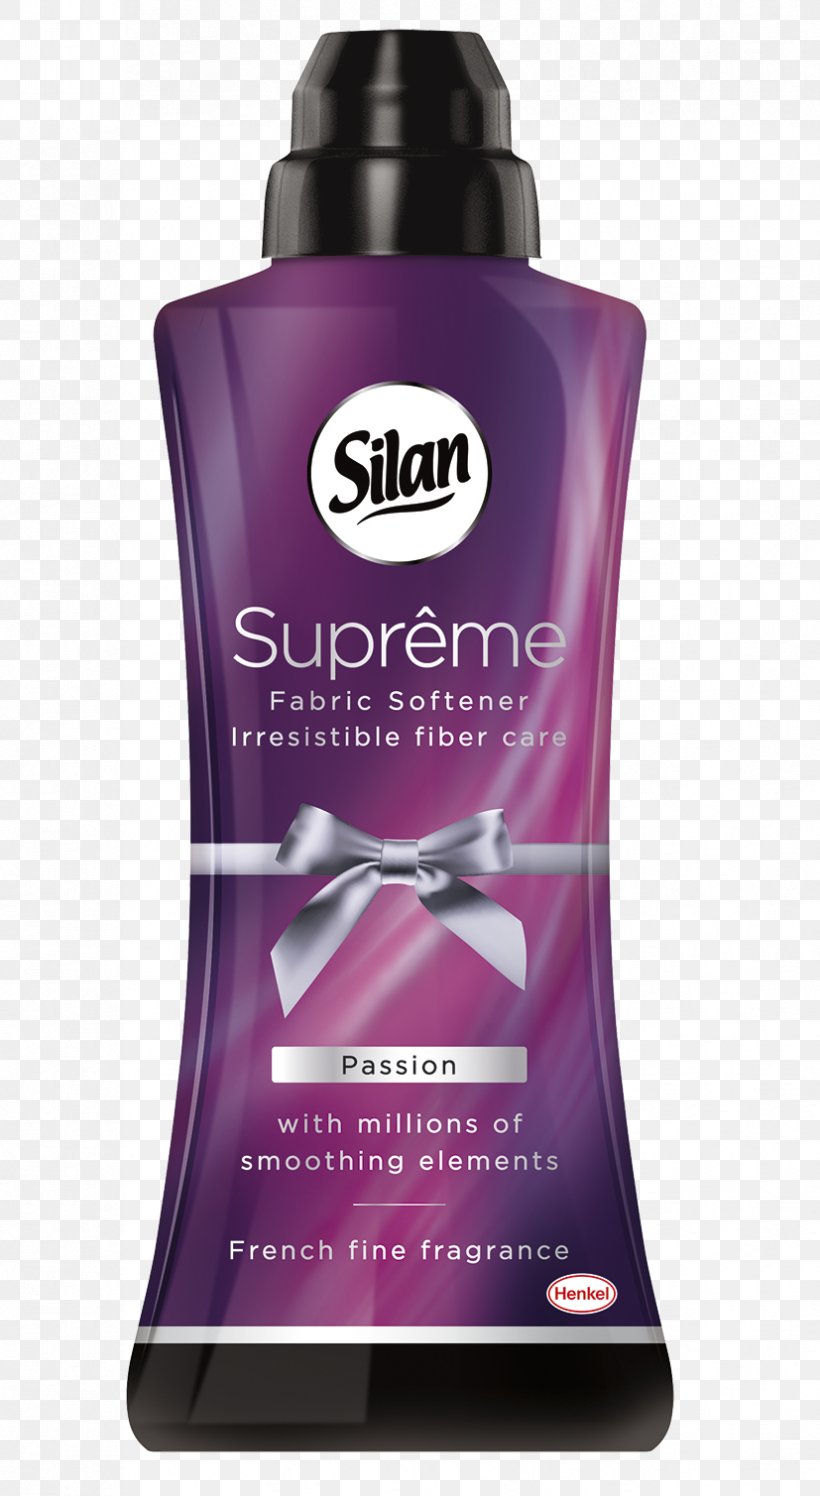 Supreme Woven Fabric Fabric Softener Fluid Shop, PNG, 827x1509px, Supreme, Fabric Softener, Fluid, Hair Care, Hypermarket Download Free